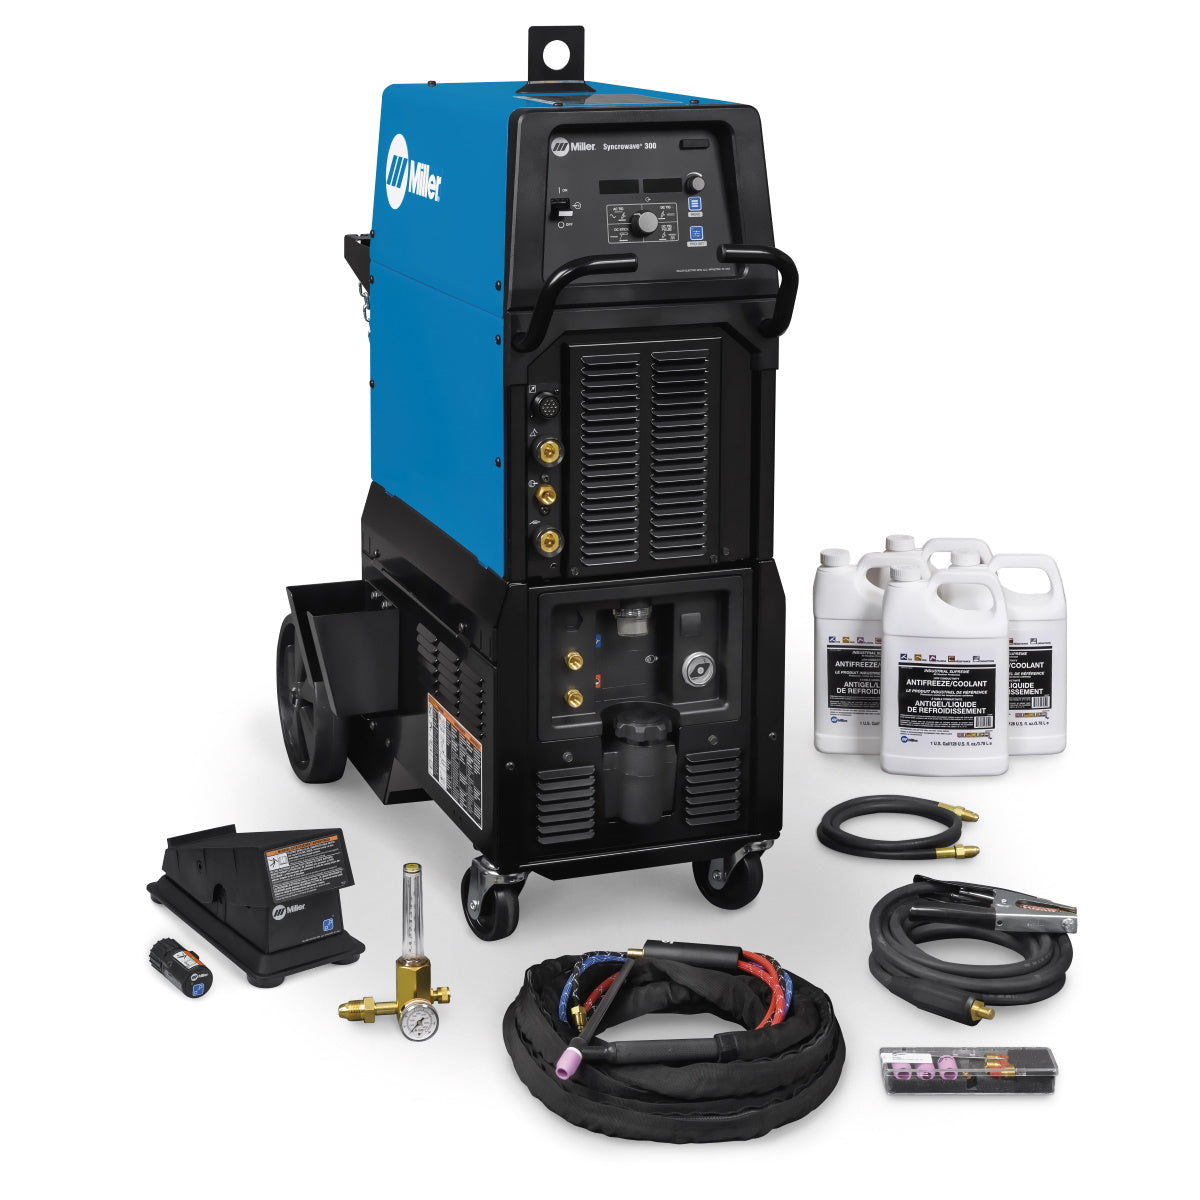 Miller Syncrowave 300 AC/DC TIG and Stick Welder Complete Pkg w/Wireless Foot Control (951872)